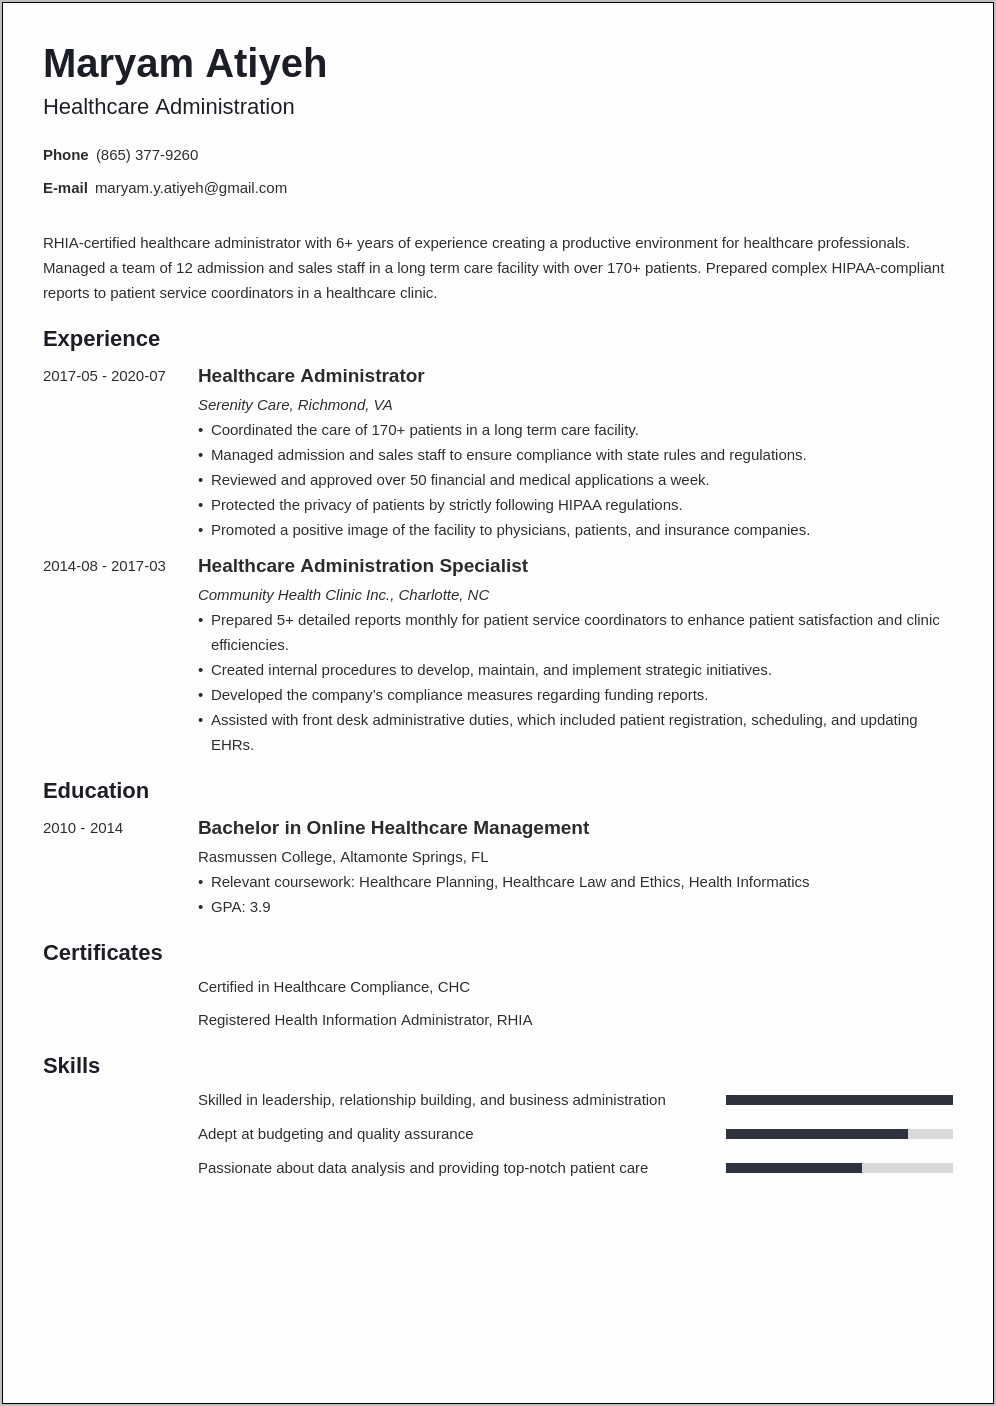 Resume Summary Statement Examples Healthcare Administration